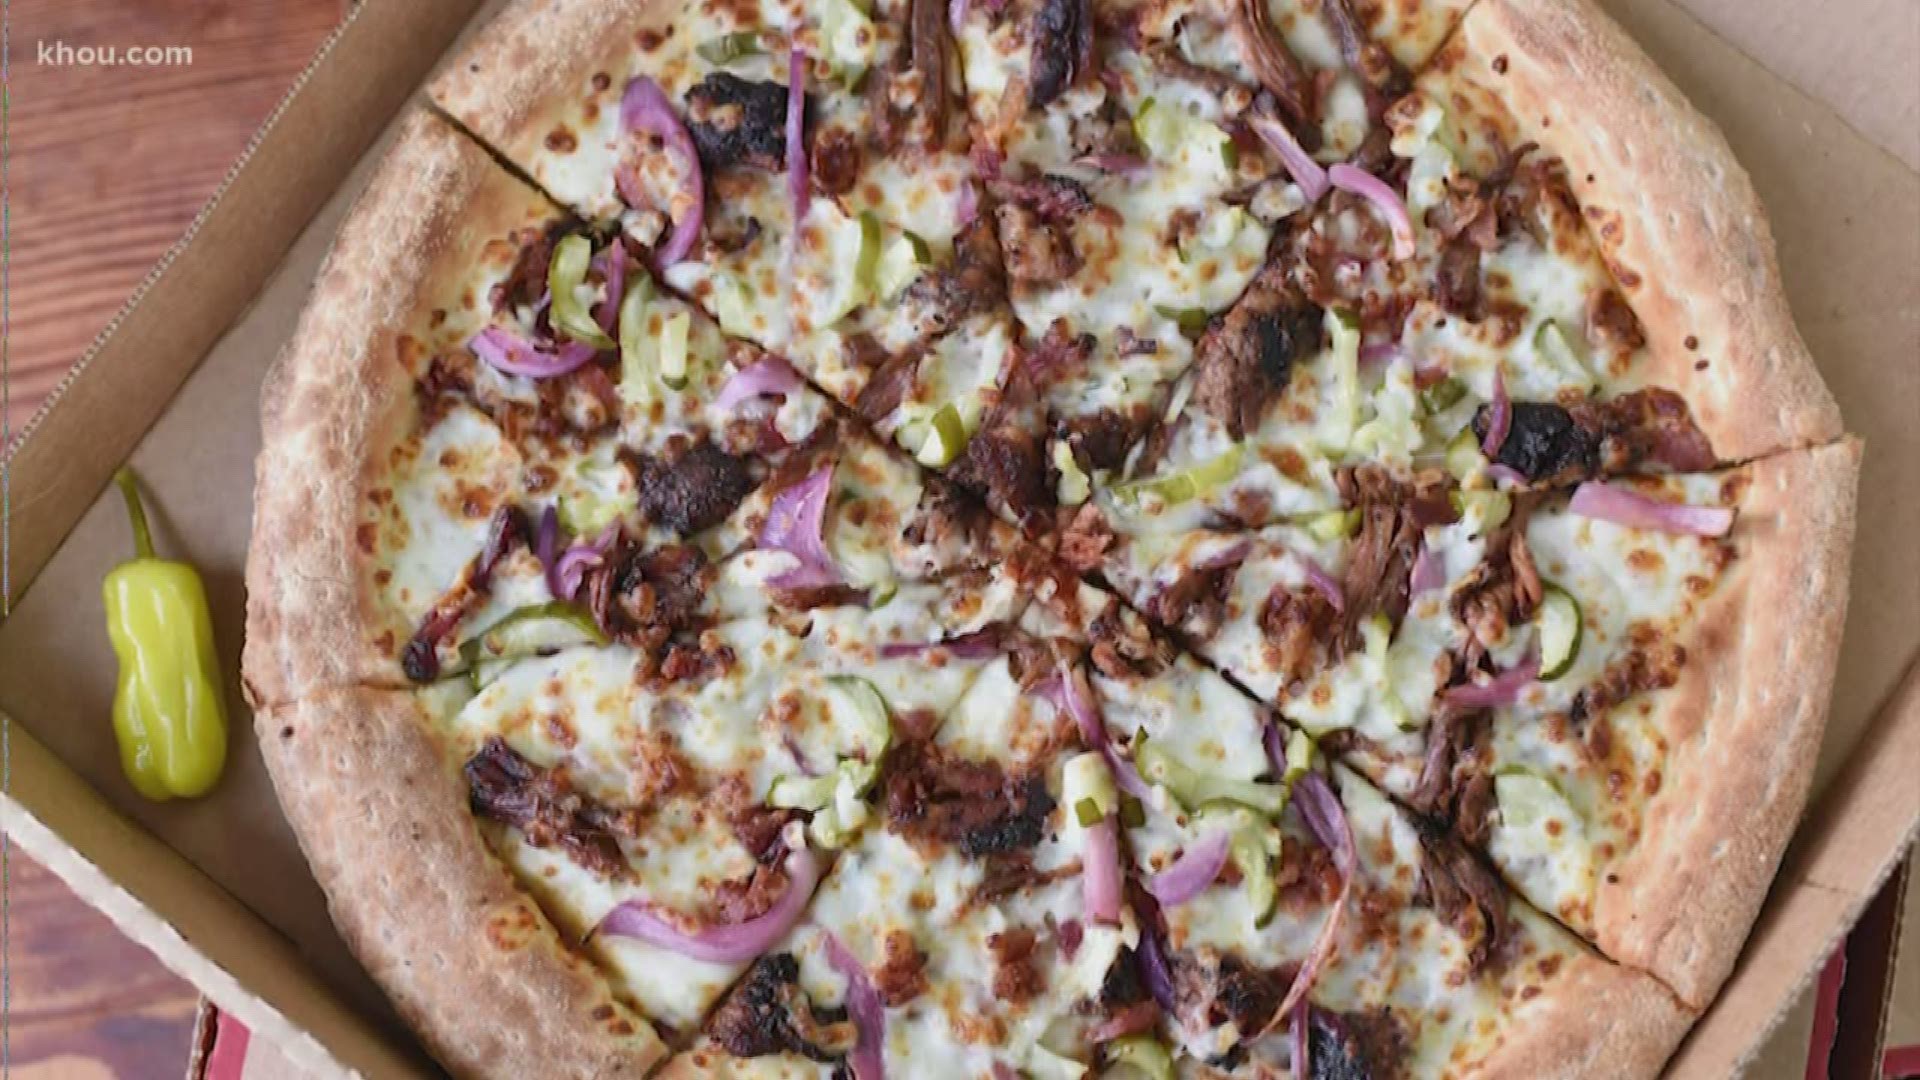 Love pizza and BBQ? This mash-up might be just the thing for you!